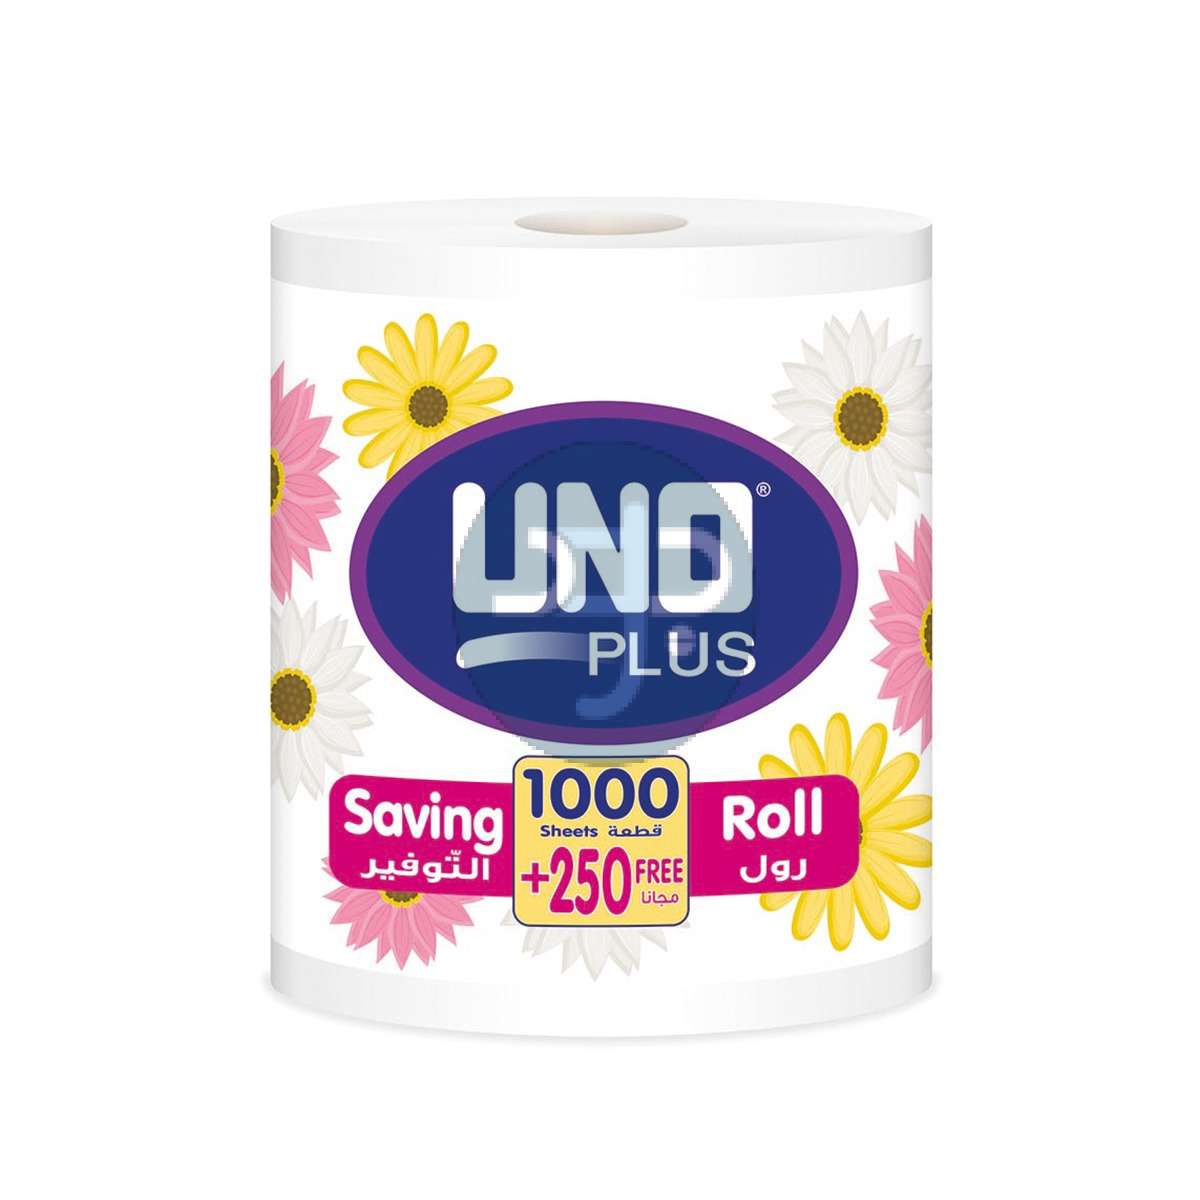 Product-Uno Plus Maxi Rolls, 1000 + 250 Sheets free - Pack Of 1